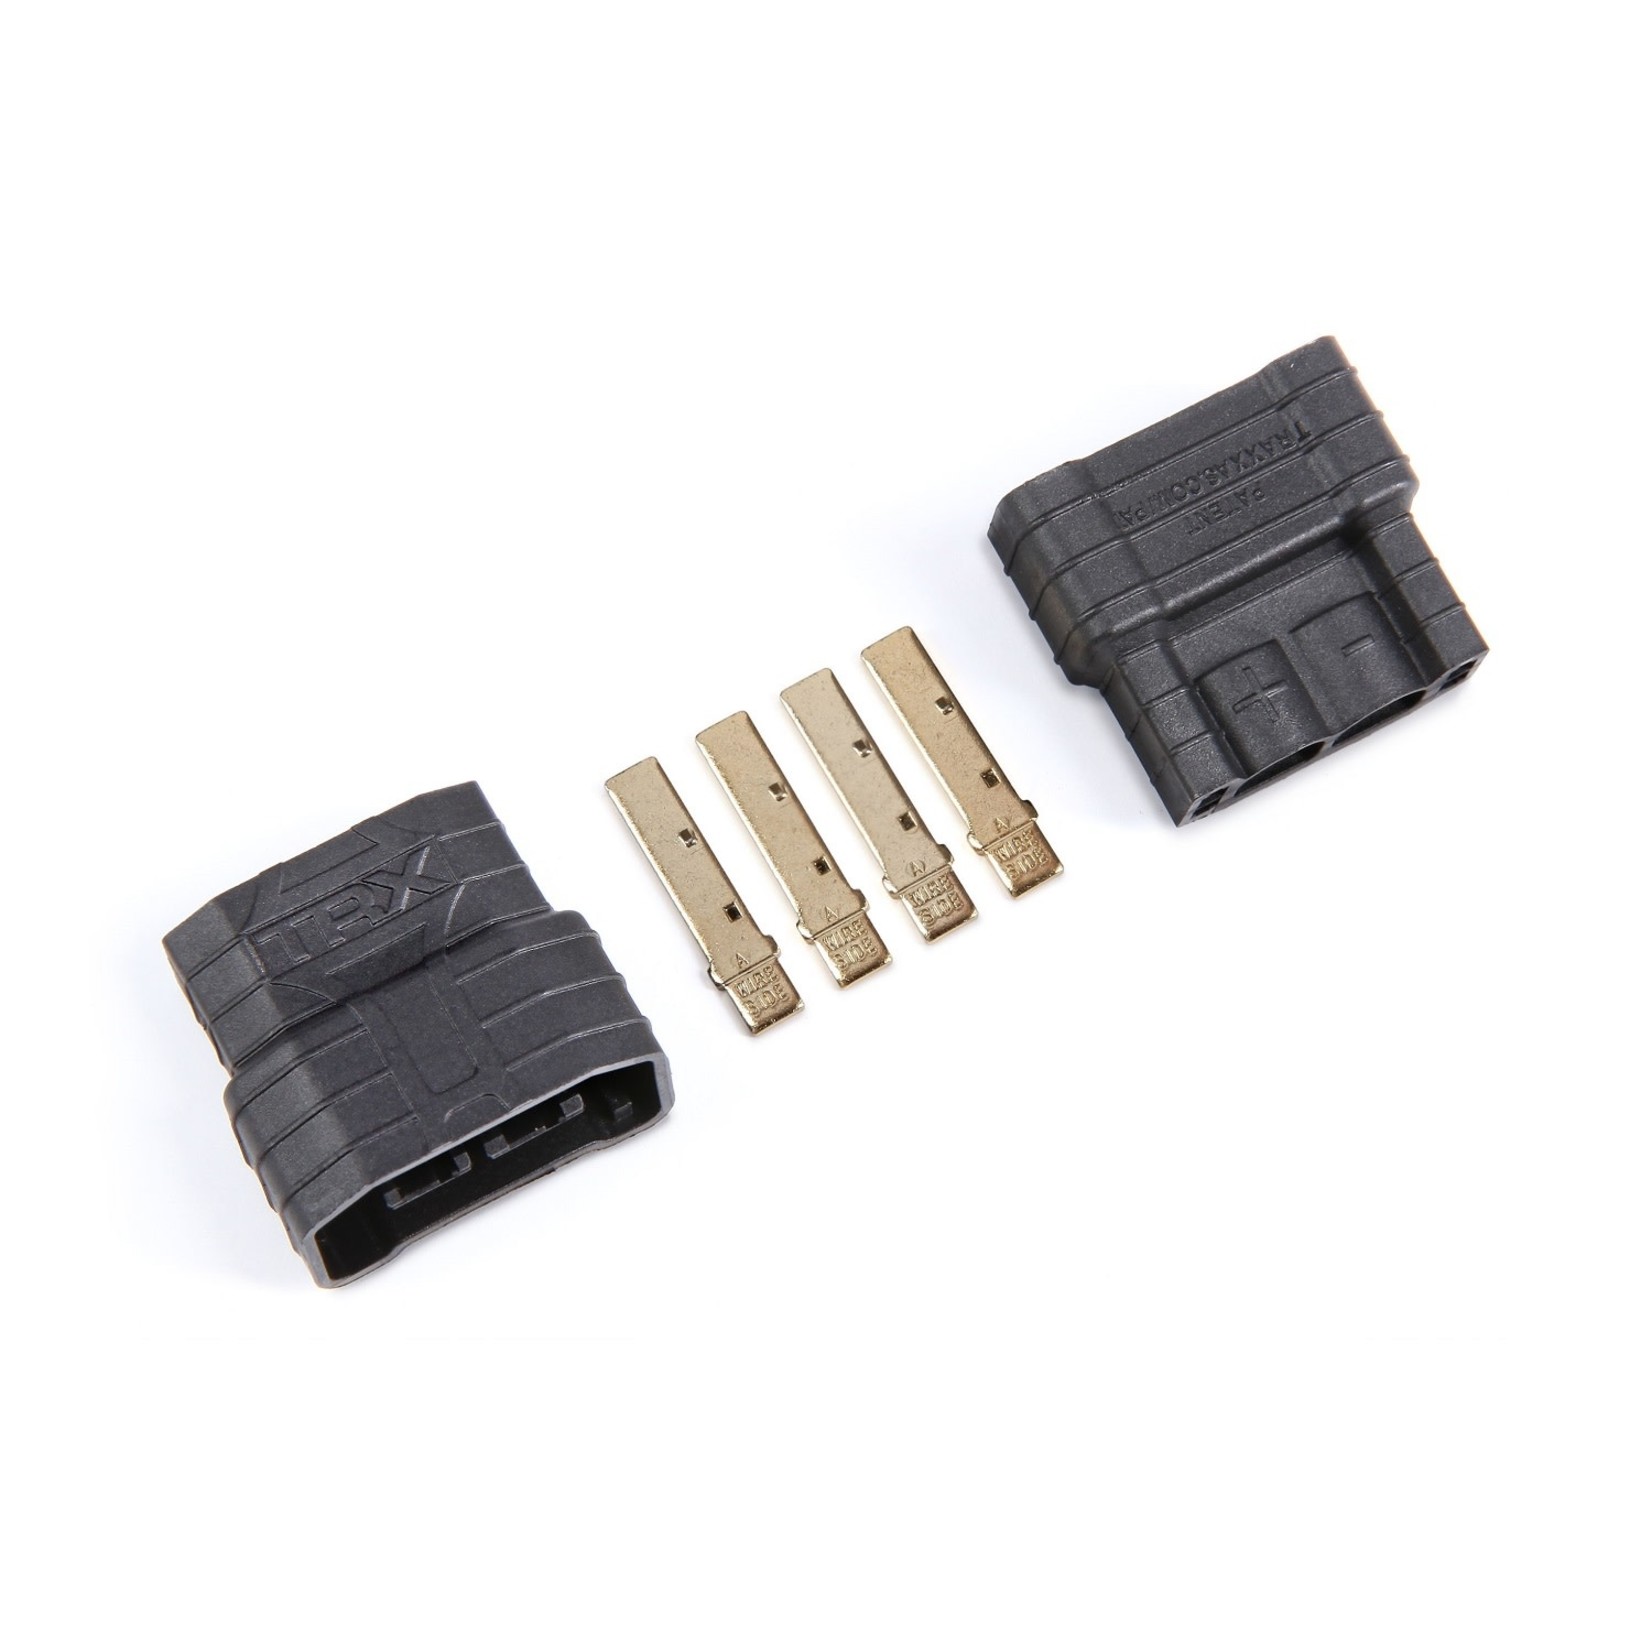 Traxxas 4S MALE CONNECTOR ESC USE ONLY